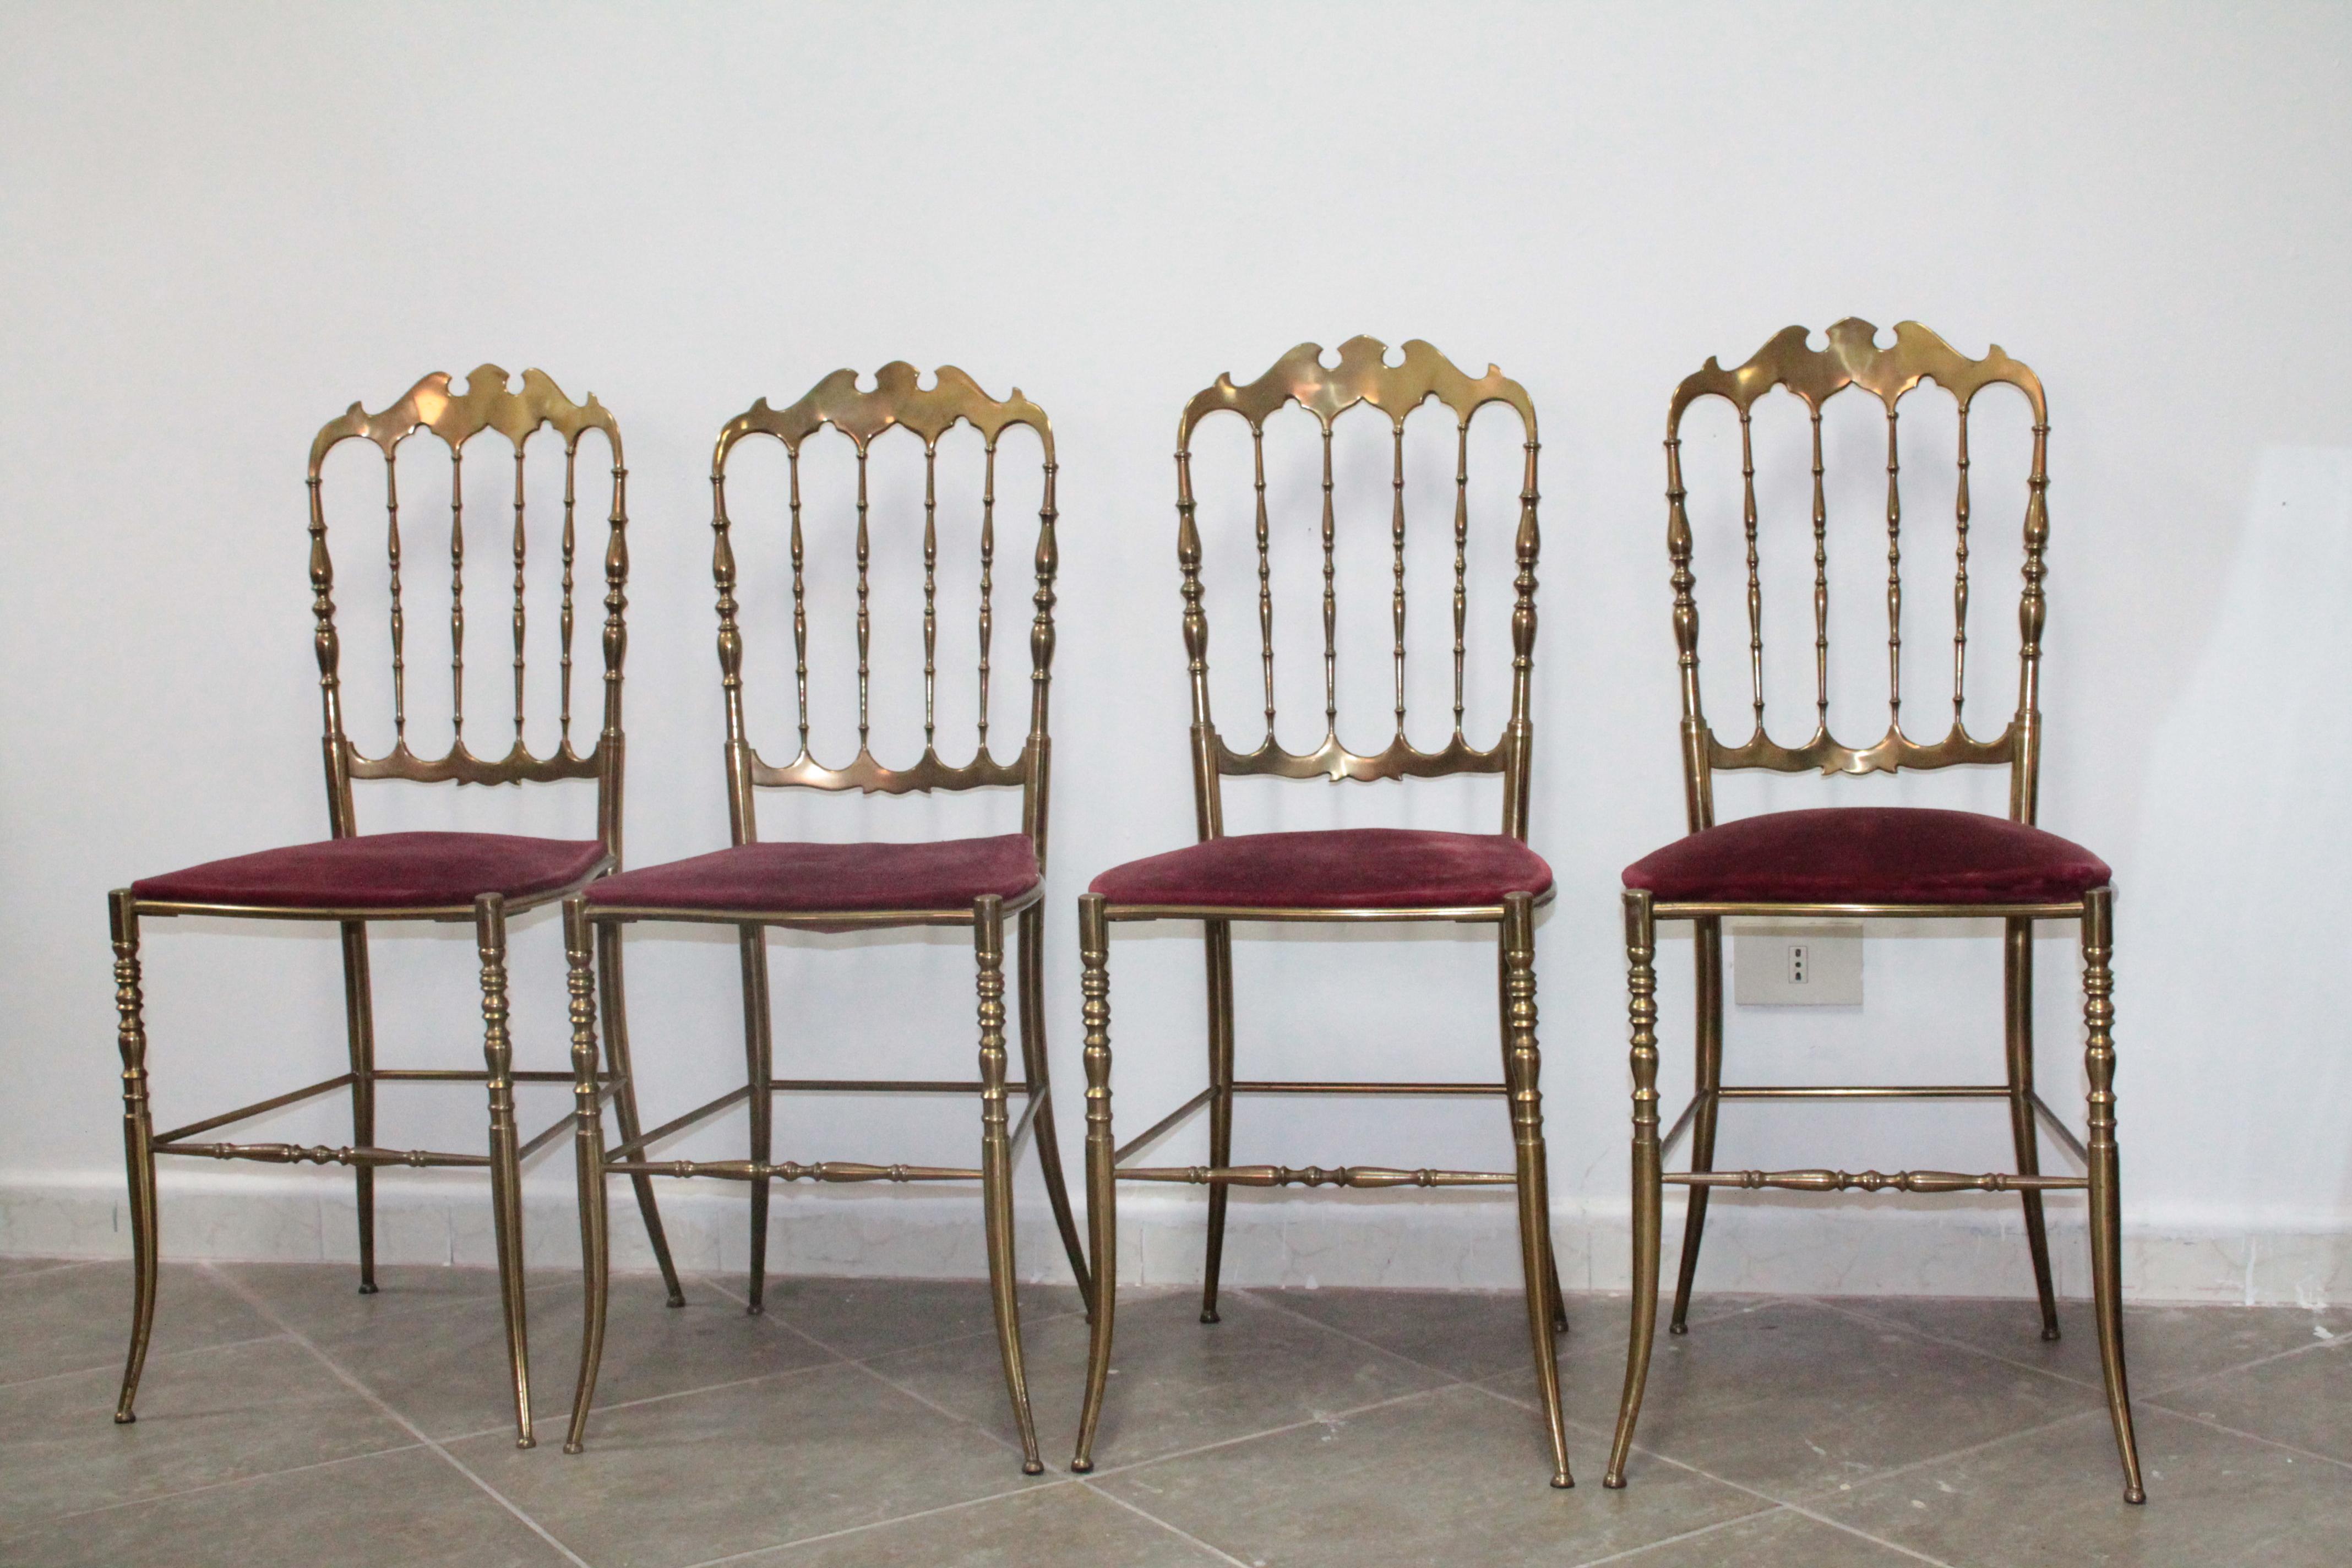 Set of 4 Chiavari-chiavarina-brass-chair-designer-Giuseppe-Gaetano-Descalzi.
Brass with original Patina. 
Original fabric with signs of aging, possibility to upholster with color of your choice.